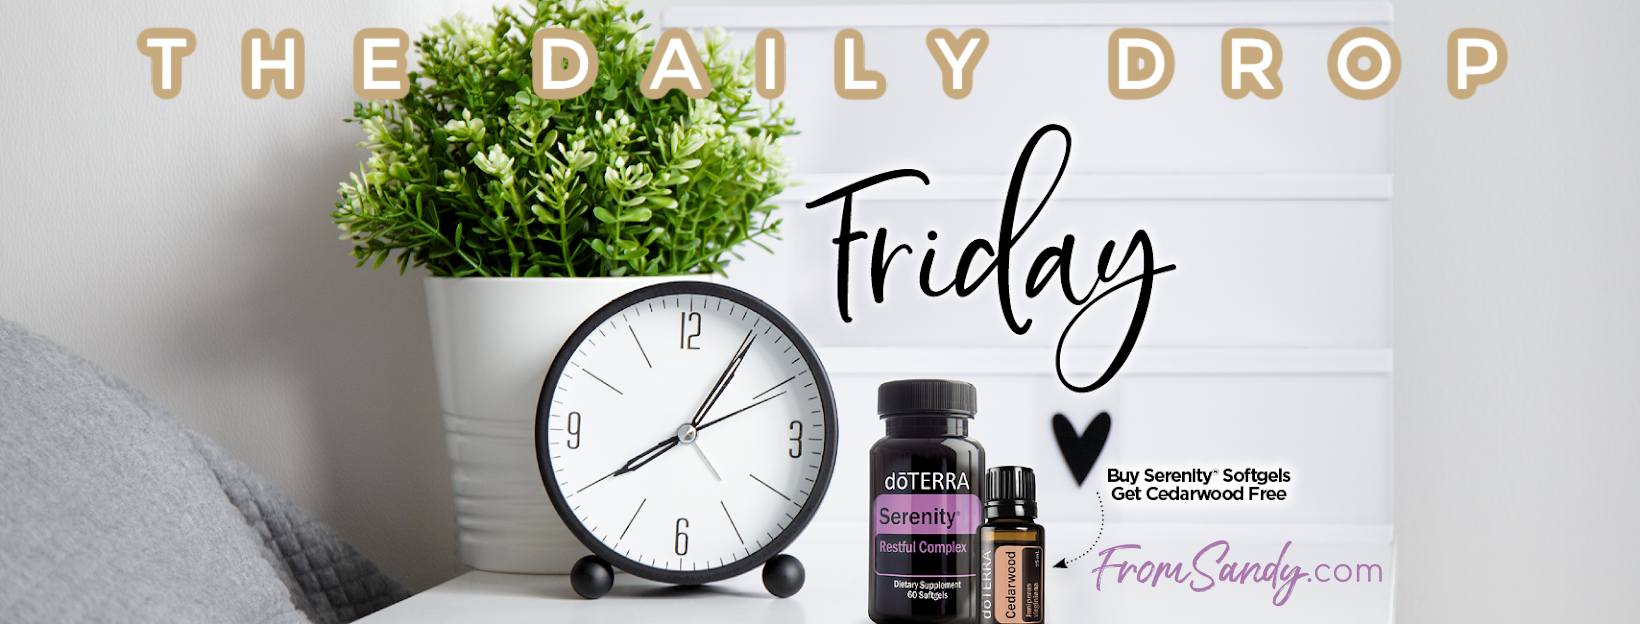 REST: Buy Serenity Softgels, Get Cedarwood Free (3/24/23 ONLY) | From Sandy